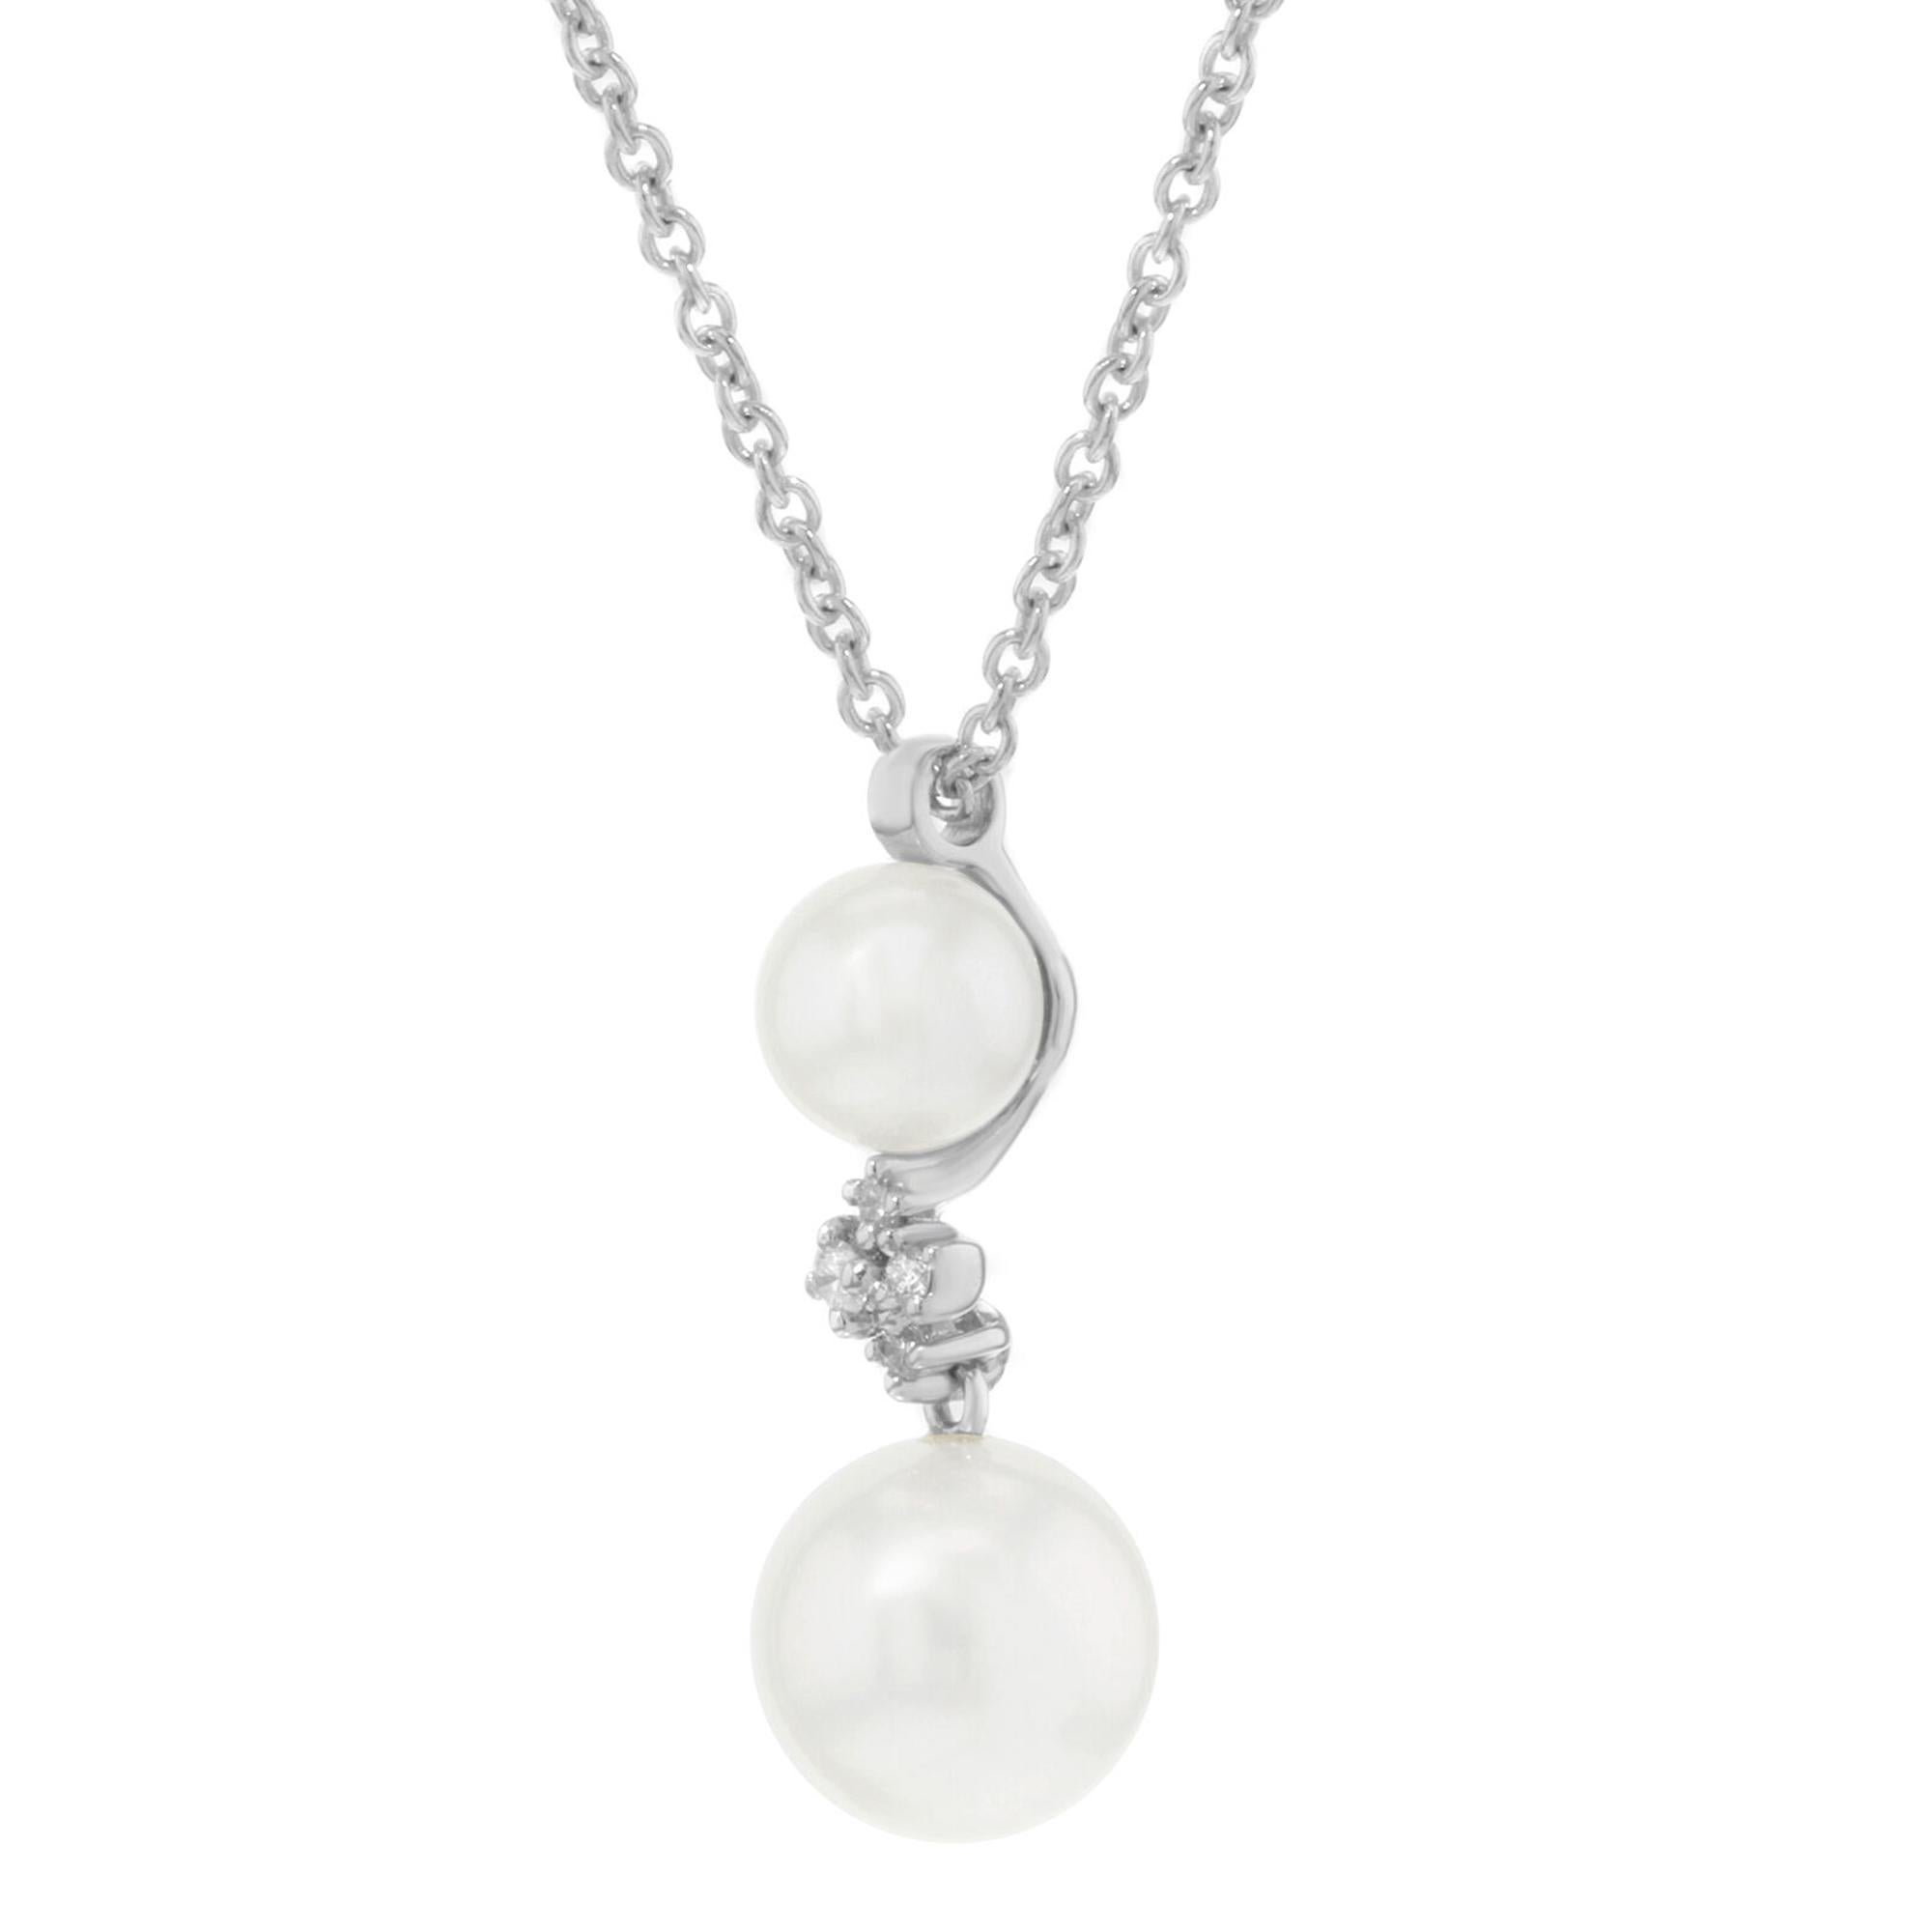 The best gift for bridesmaids is here! Freshwater pearls and natural diamond pendant necklace from Bliss by Damiani. Crafted in 18k white gold and encrusted with 0.04 cttw of round cut diamonds. Chain length: 18 inches. Pearl size: 5 mm. Pendant